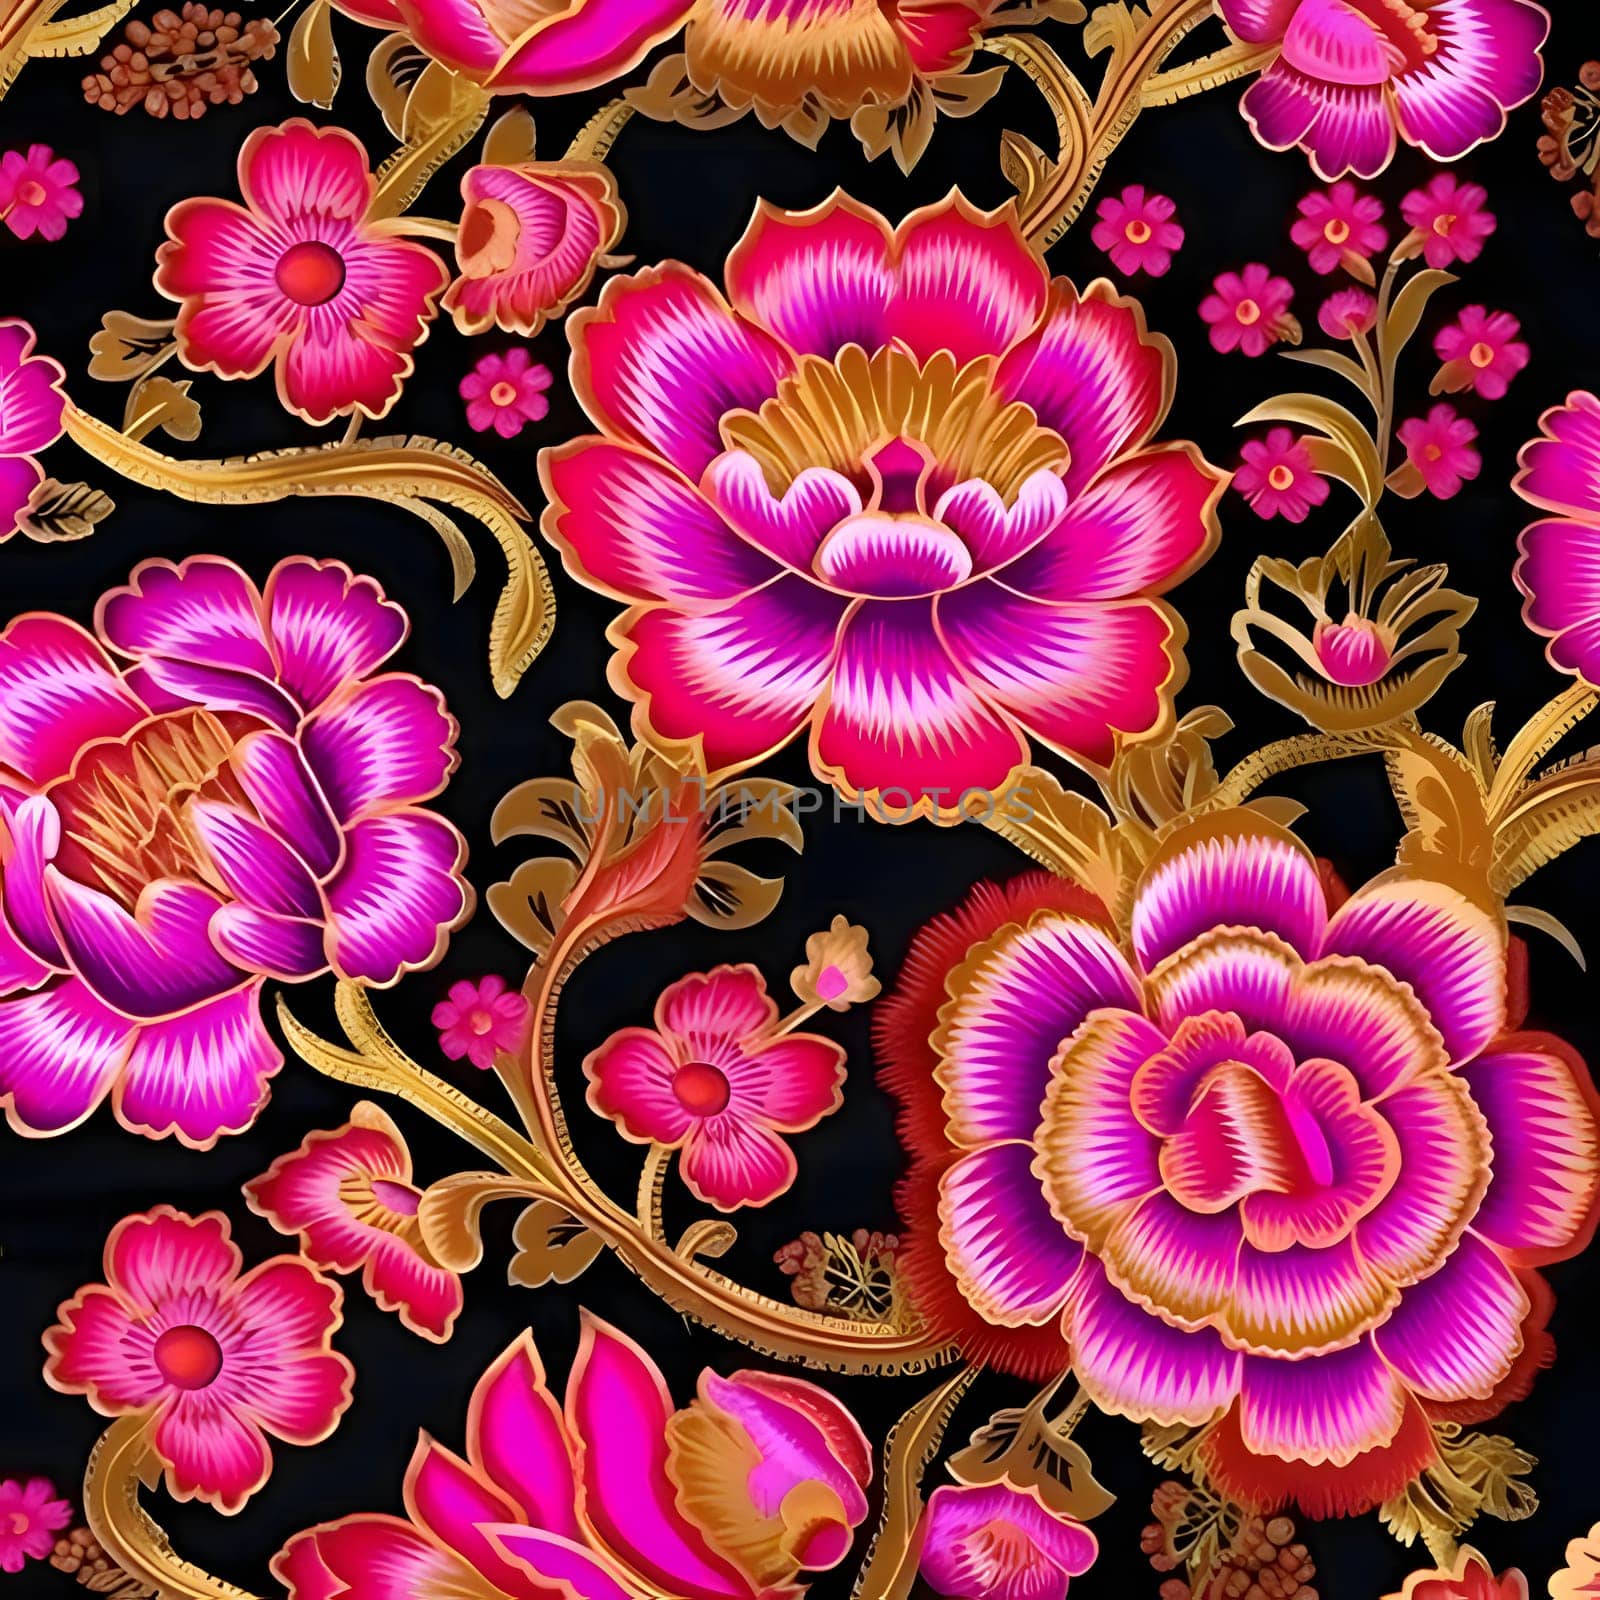 Patterns and banners backgrounds: Embroidery floral seamless pattern on black background. Vector illustration.